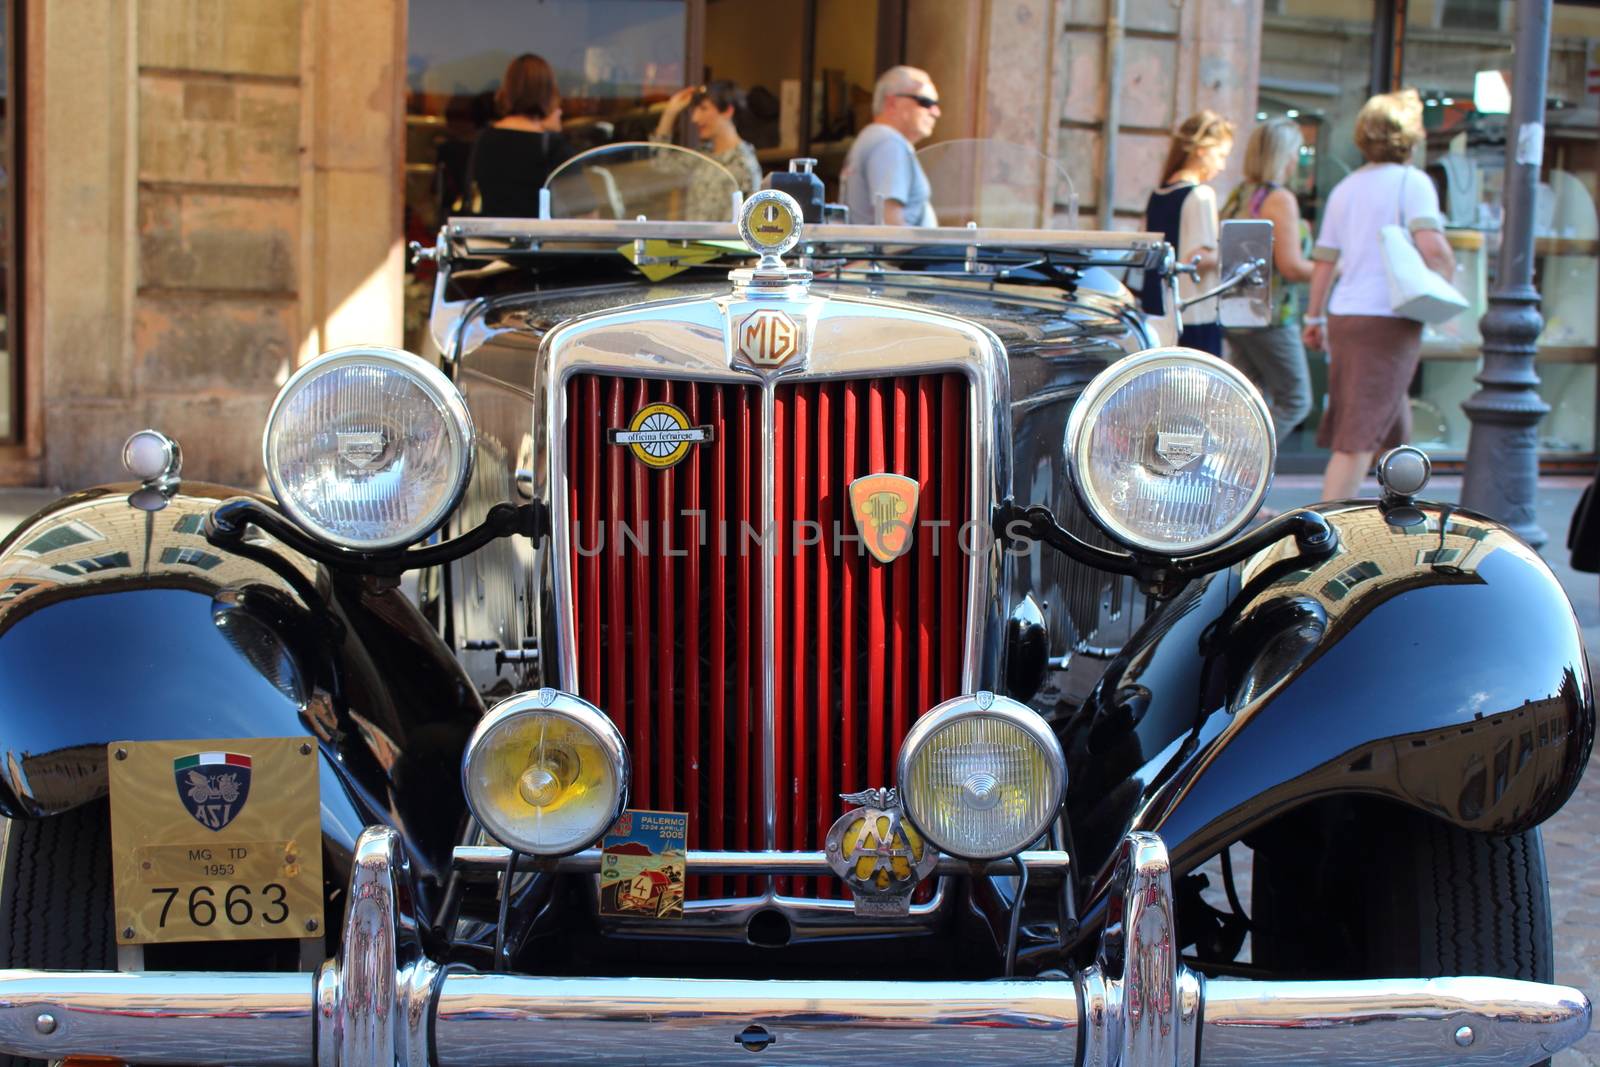 Ferrara, Italia - September 24, 2016: The event "AutoMotoStoriche in Old Town" you can admire an exhibition of cars and motorcycles in the historic center of Ferrara. Front of MG TD, years 1953